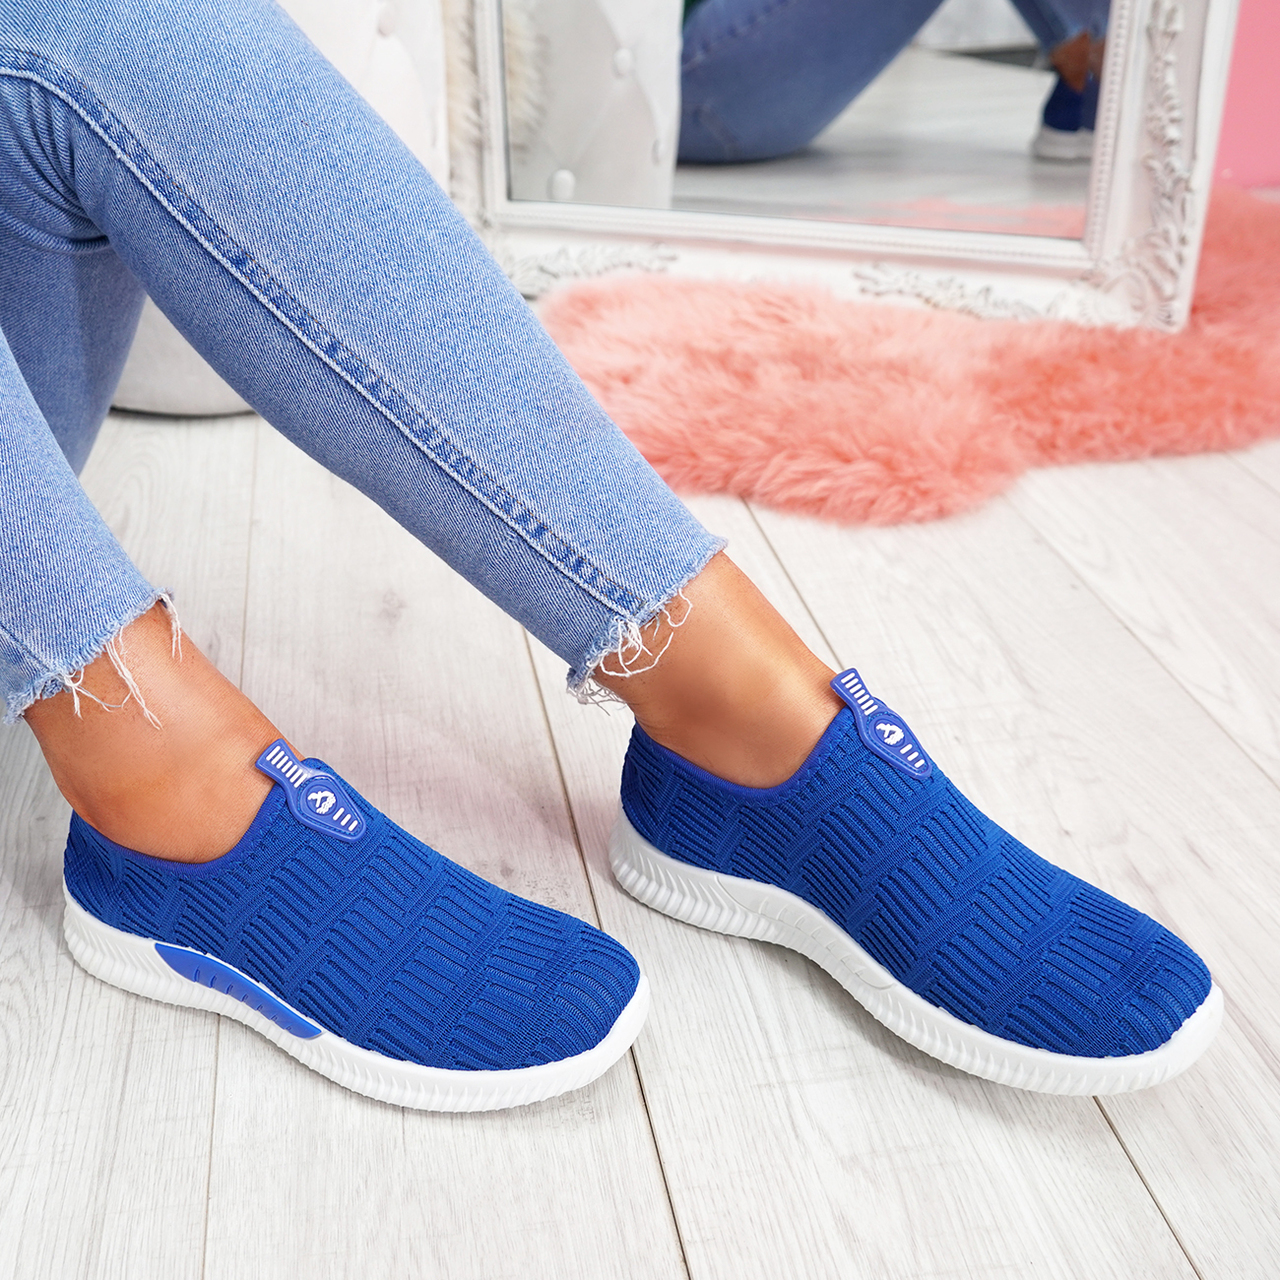 The new trend : knitted slip on trainers! - Cucu Fashion